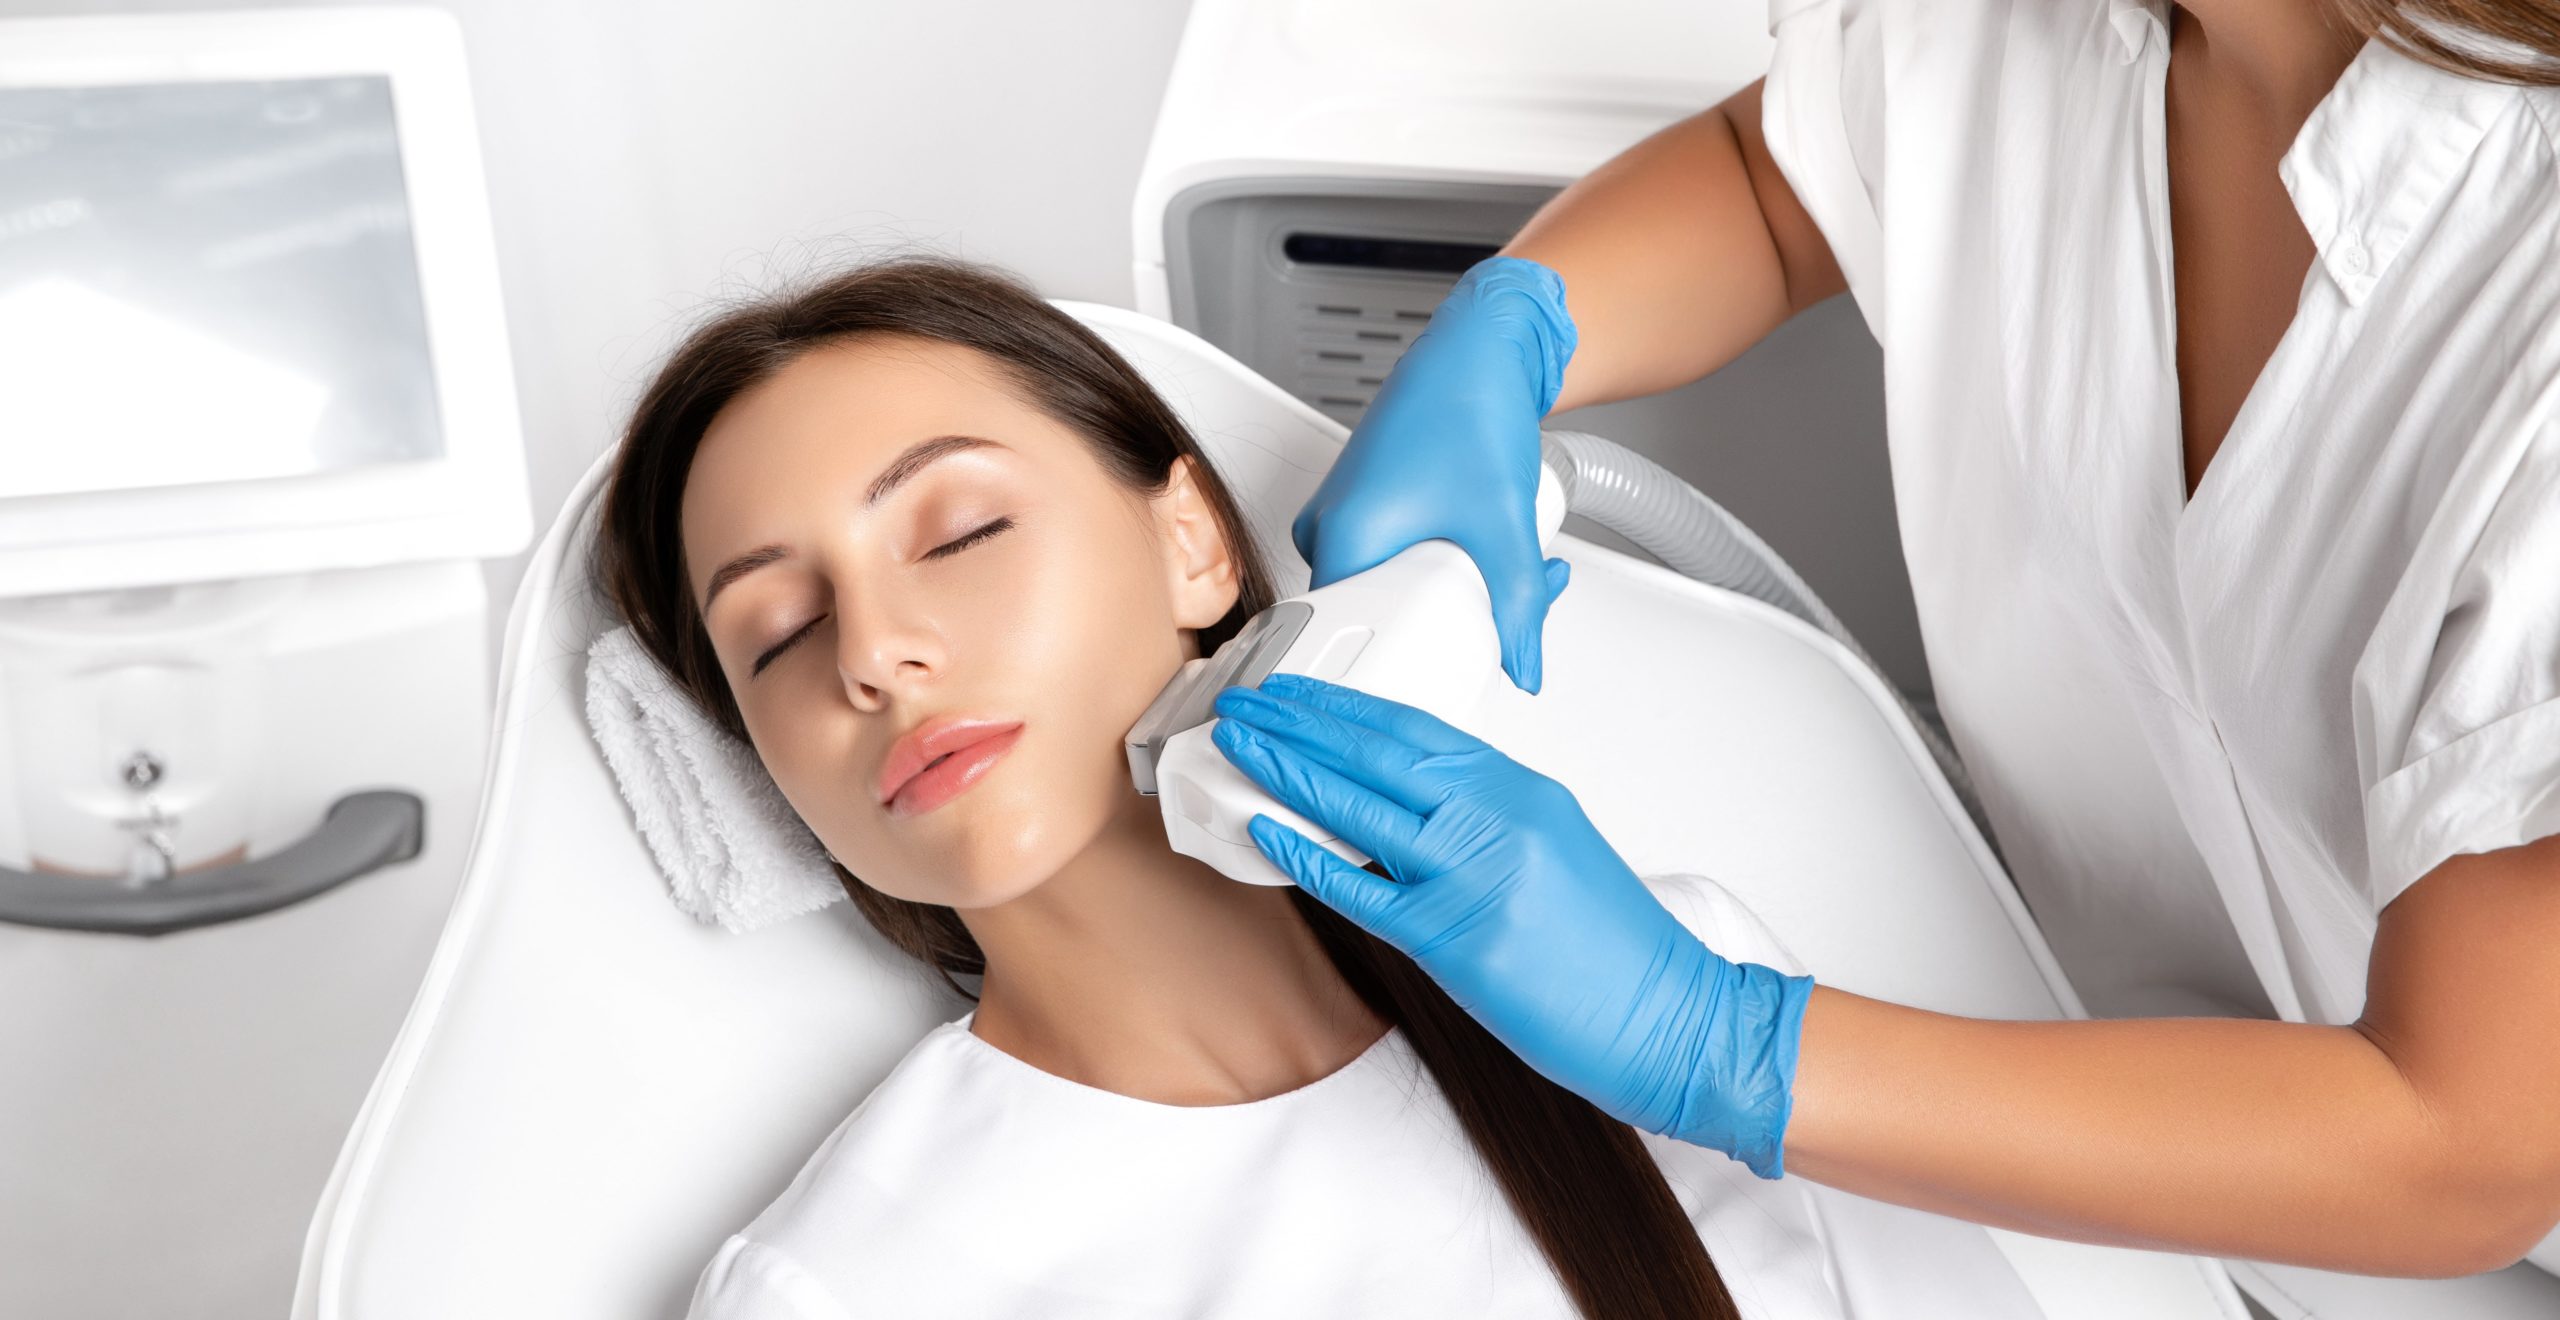 Choosing the Right Laser Treatment